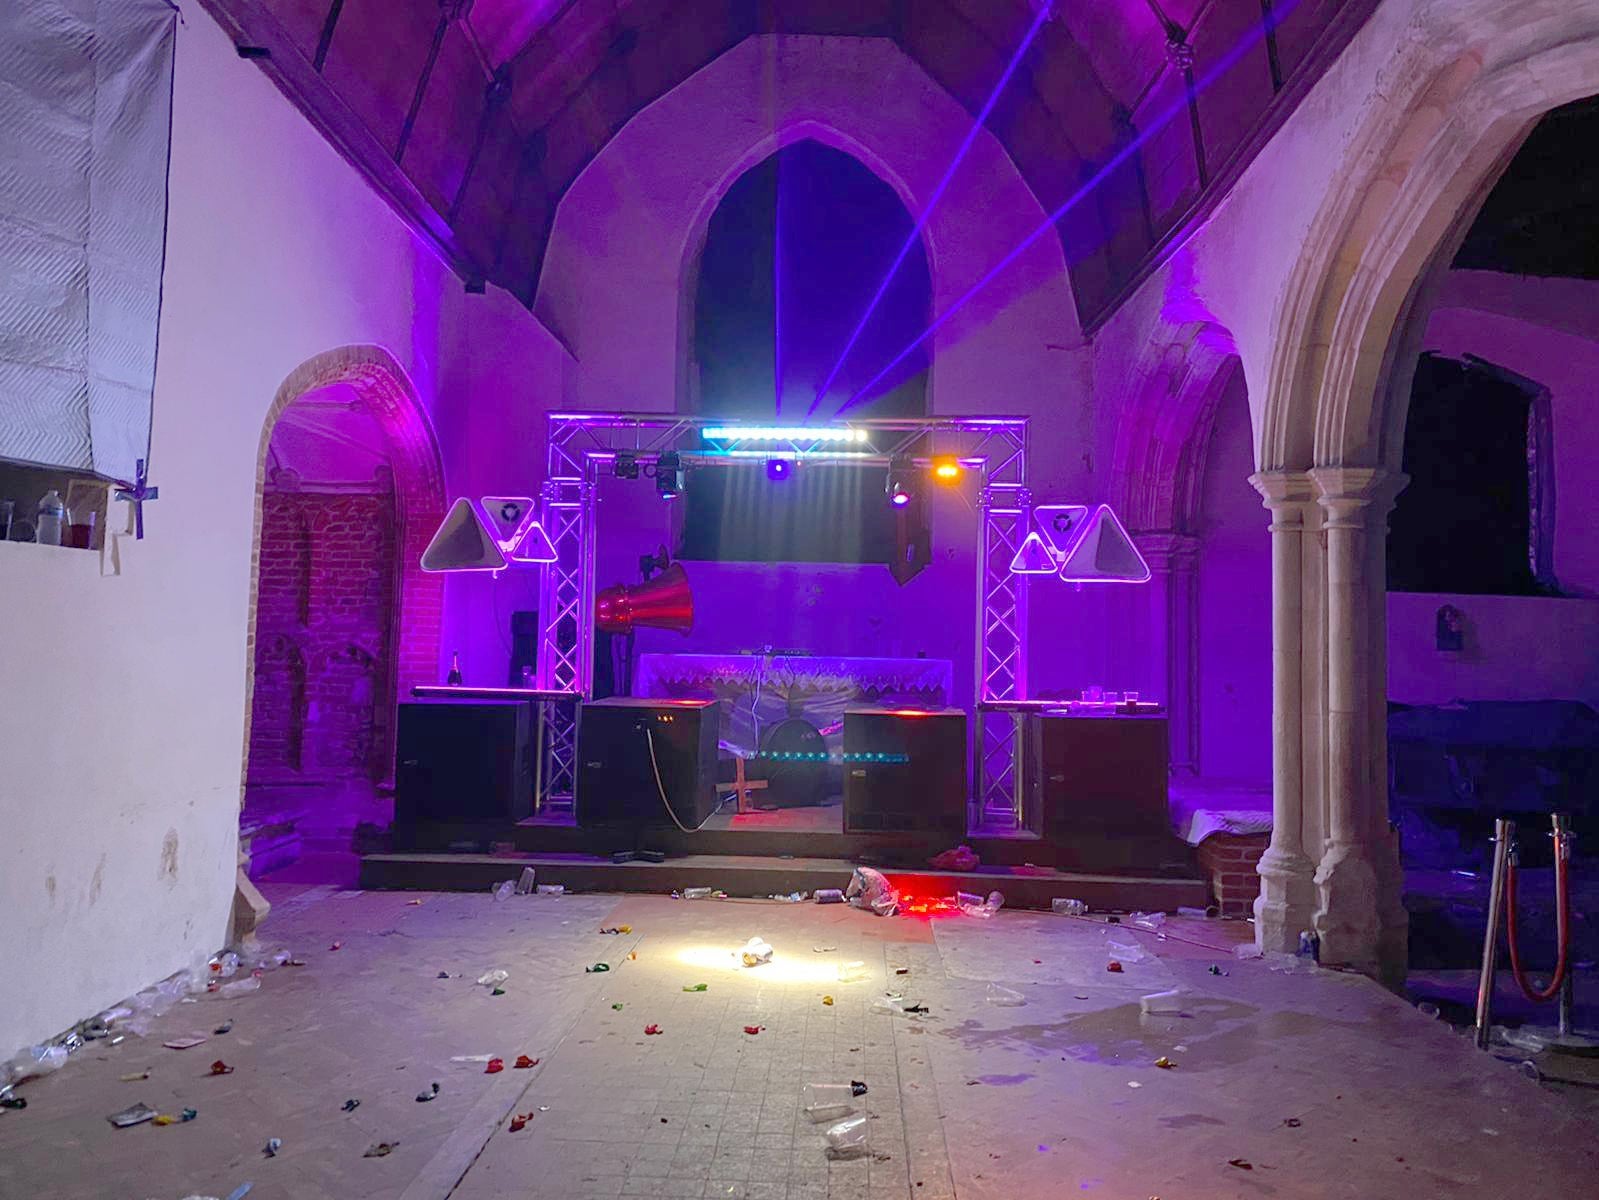 Equipment was seized at a church in Essex after police broke up a party